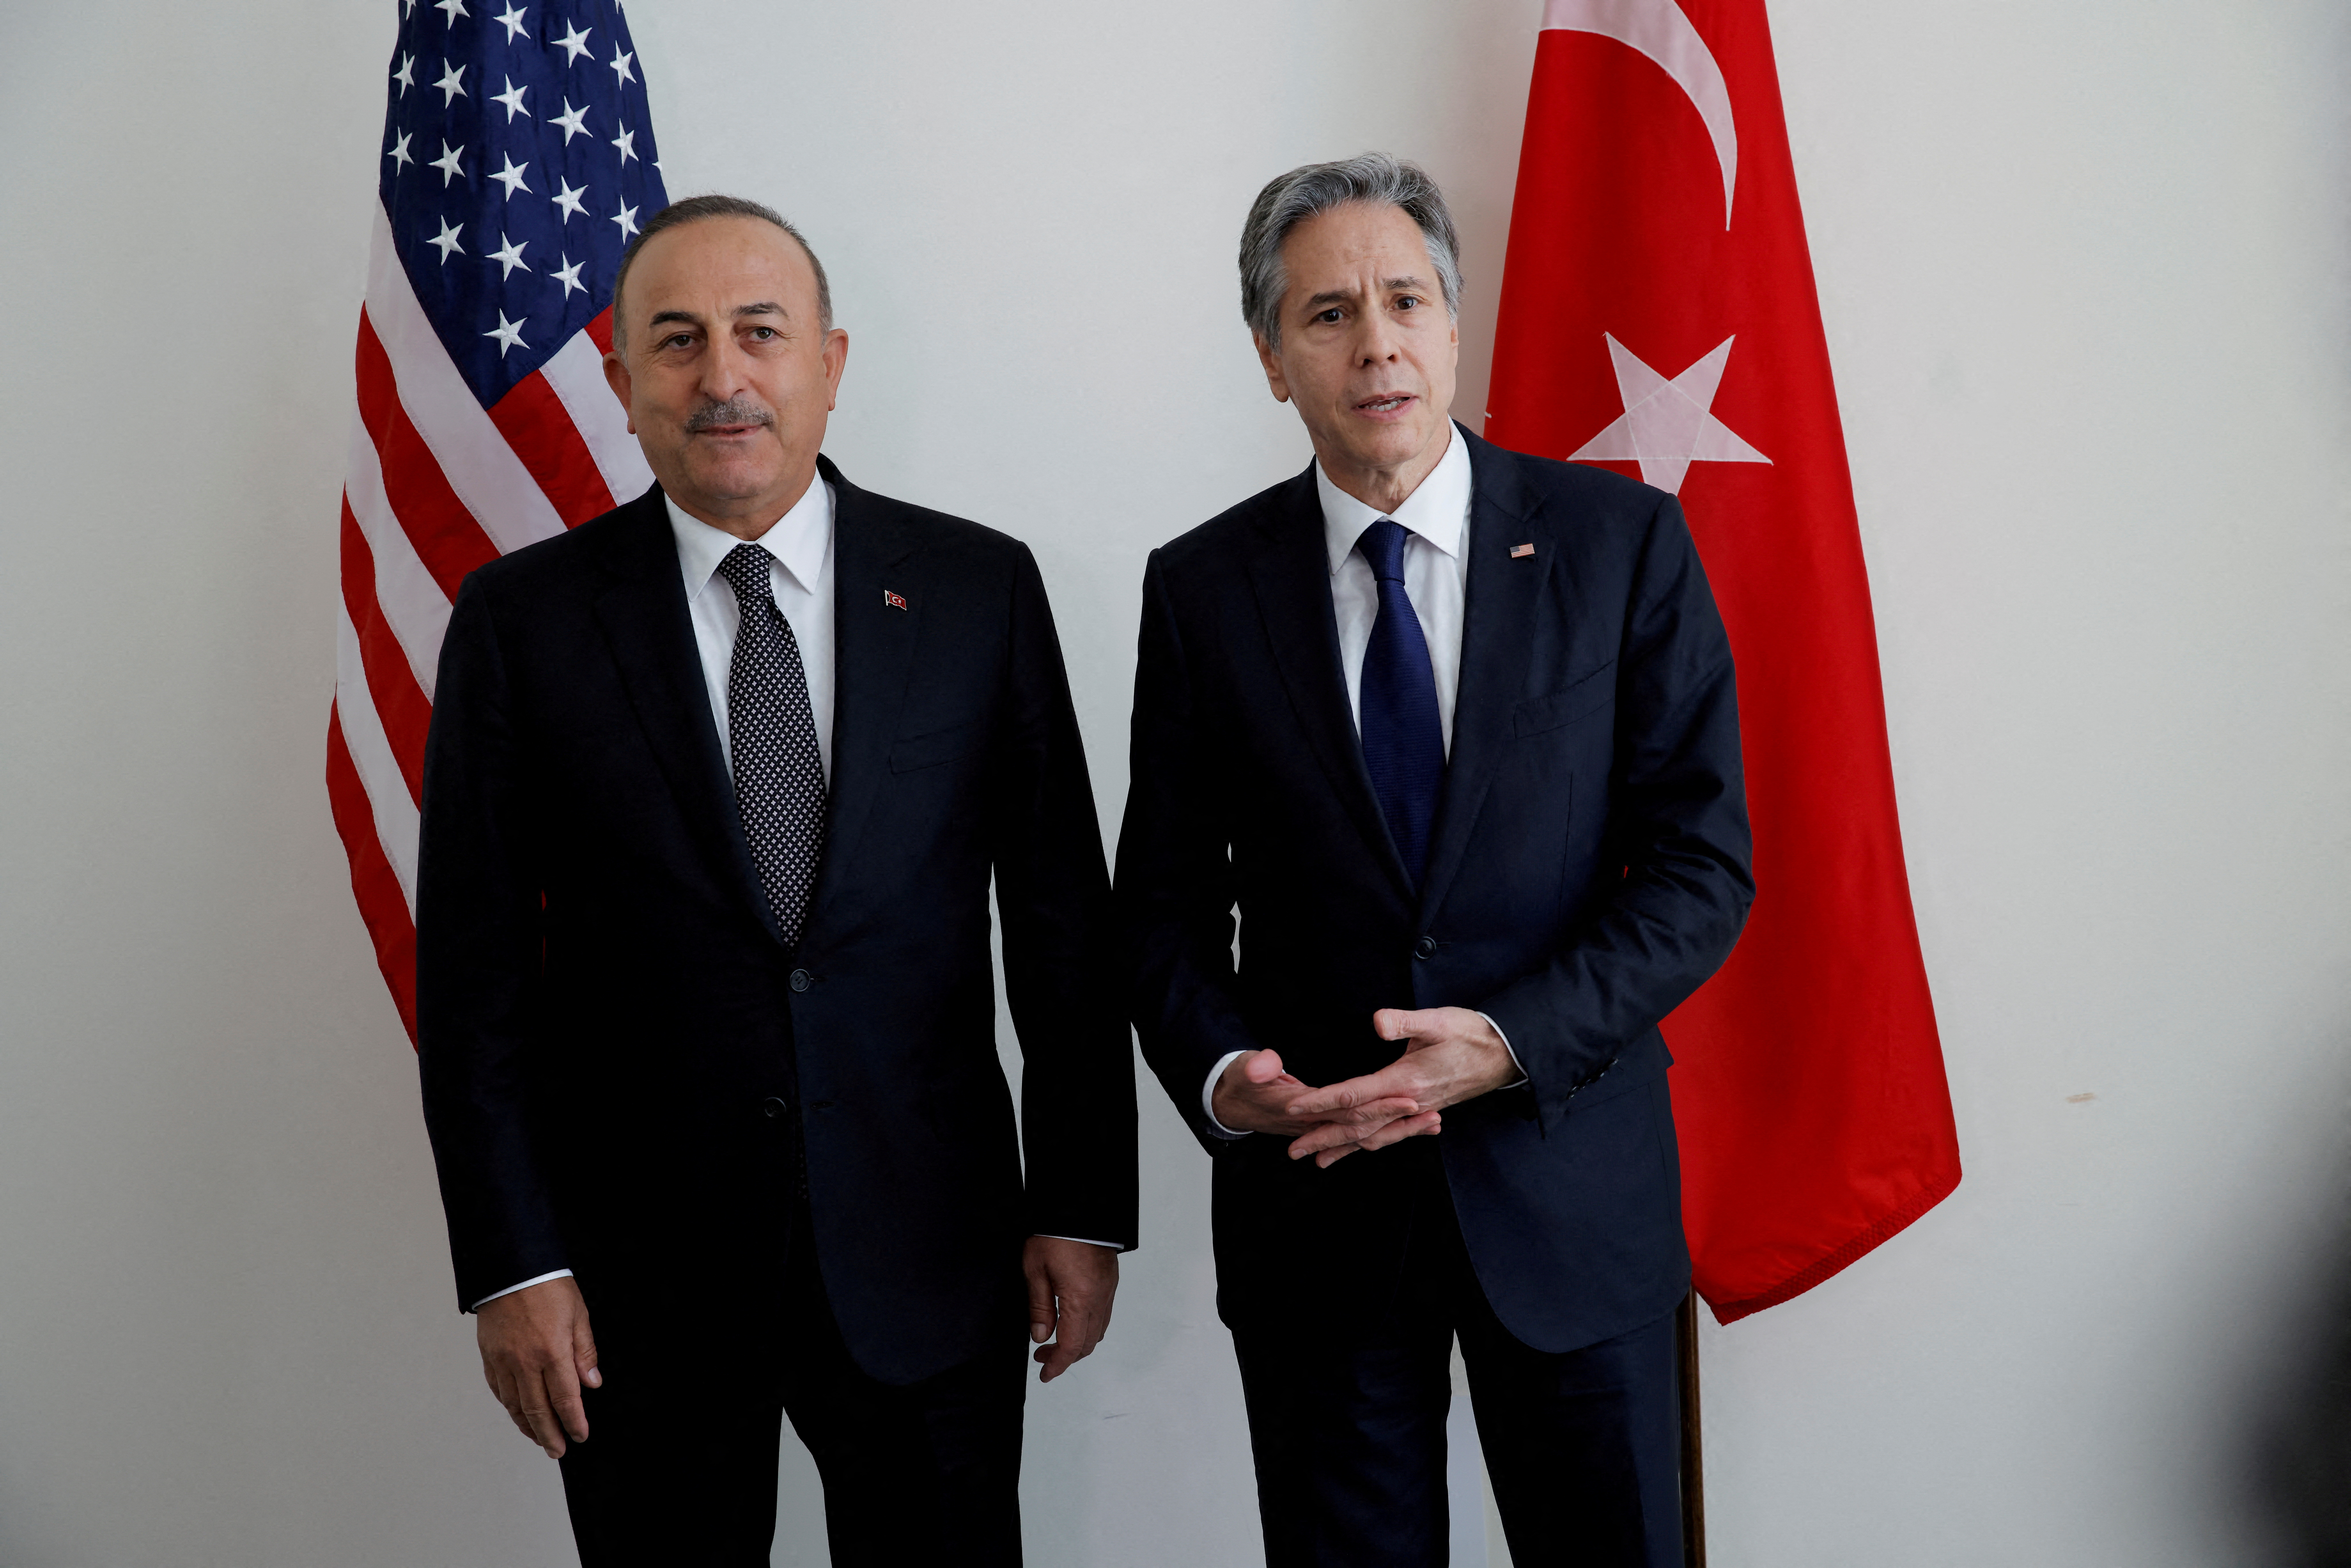 U.S. Secretary of State Blinken meets with Turkish Foreign Minister Cavusoglu at U.N. in New York